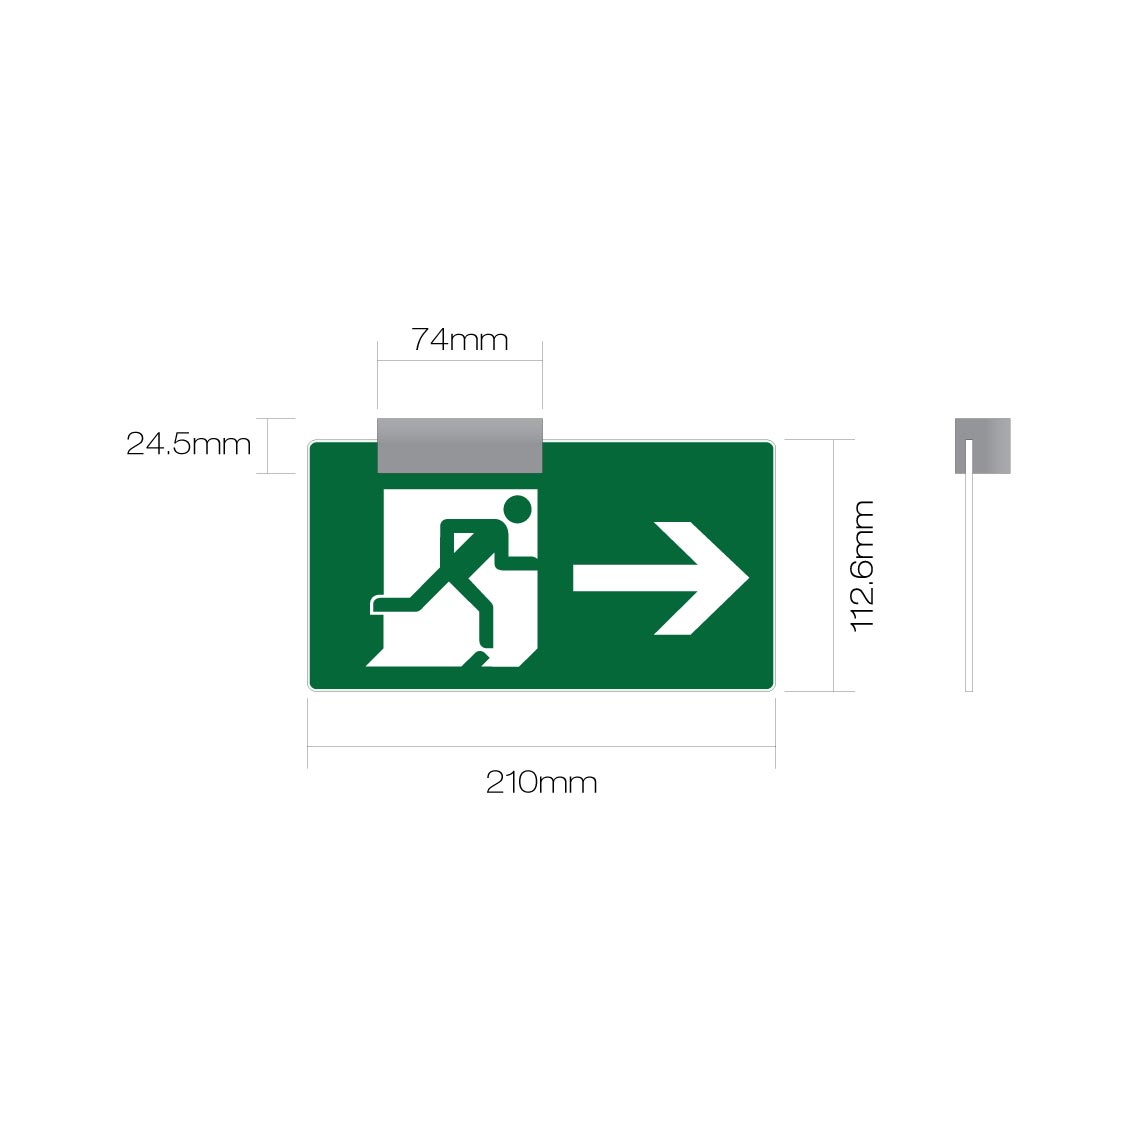 Wall-mounted fire exit sign